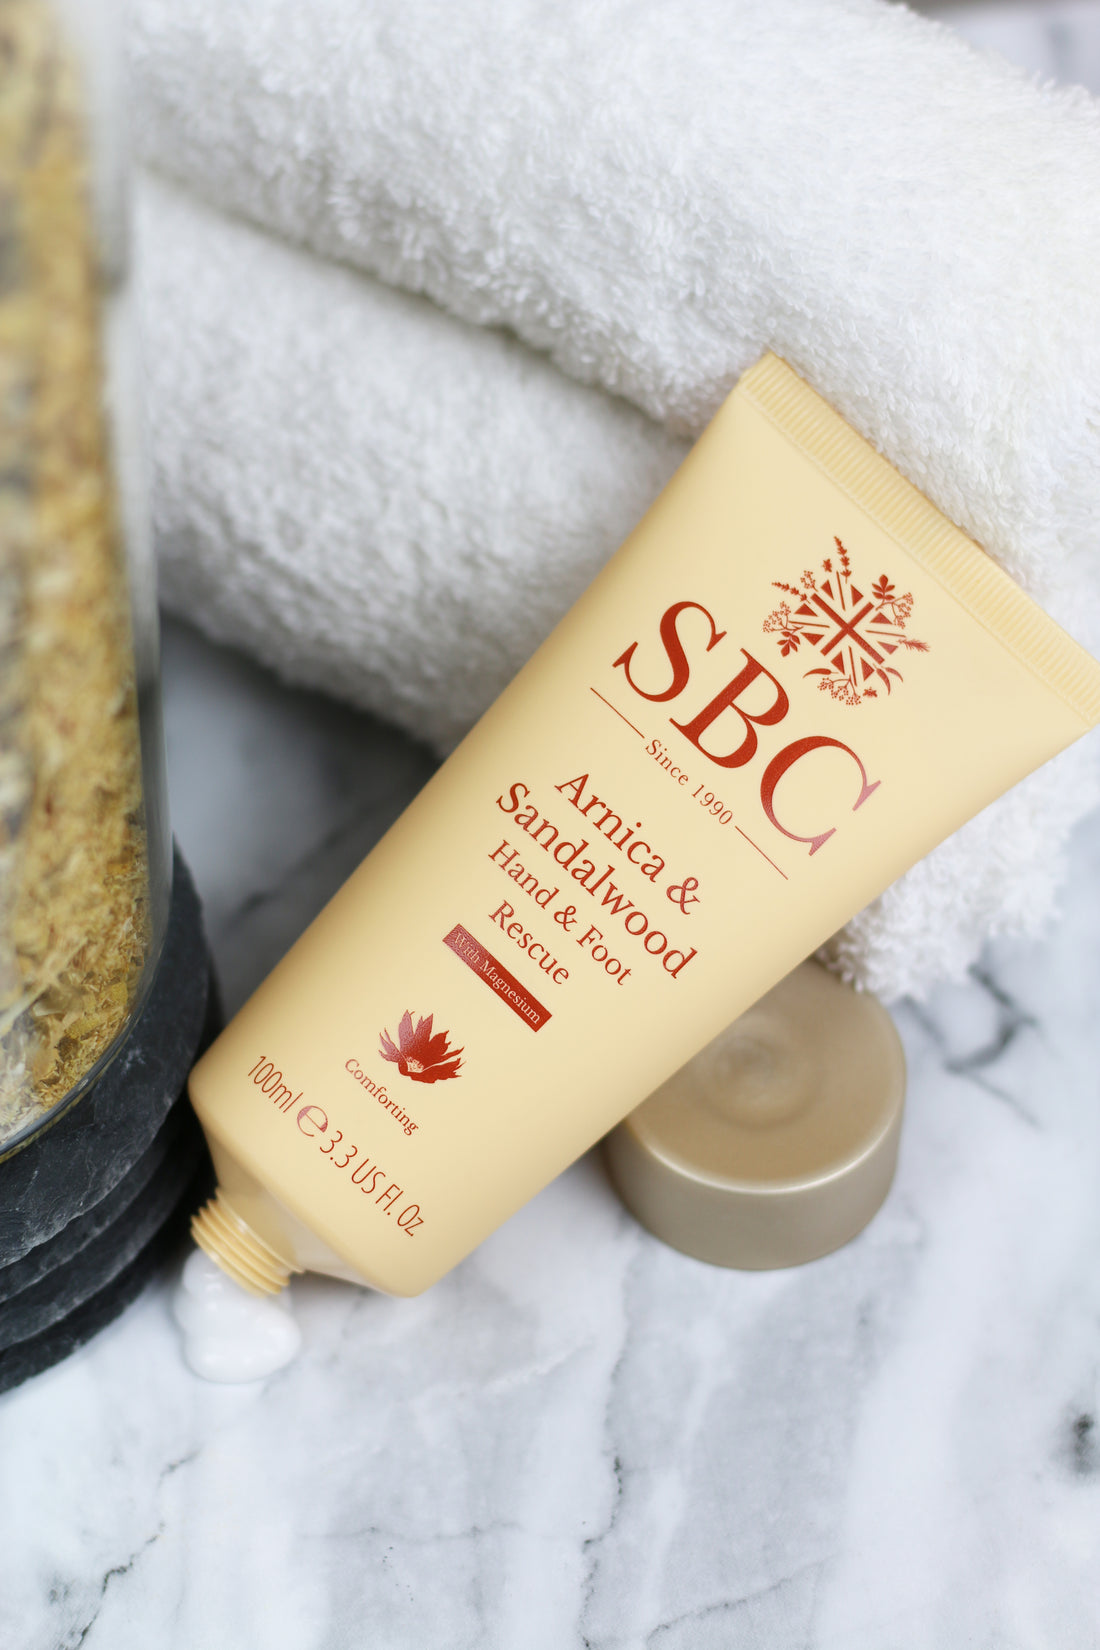 SBC Skincare's Arnica & Sandalwood Hand & Foot Rescue on a marble table